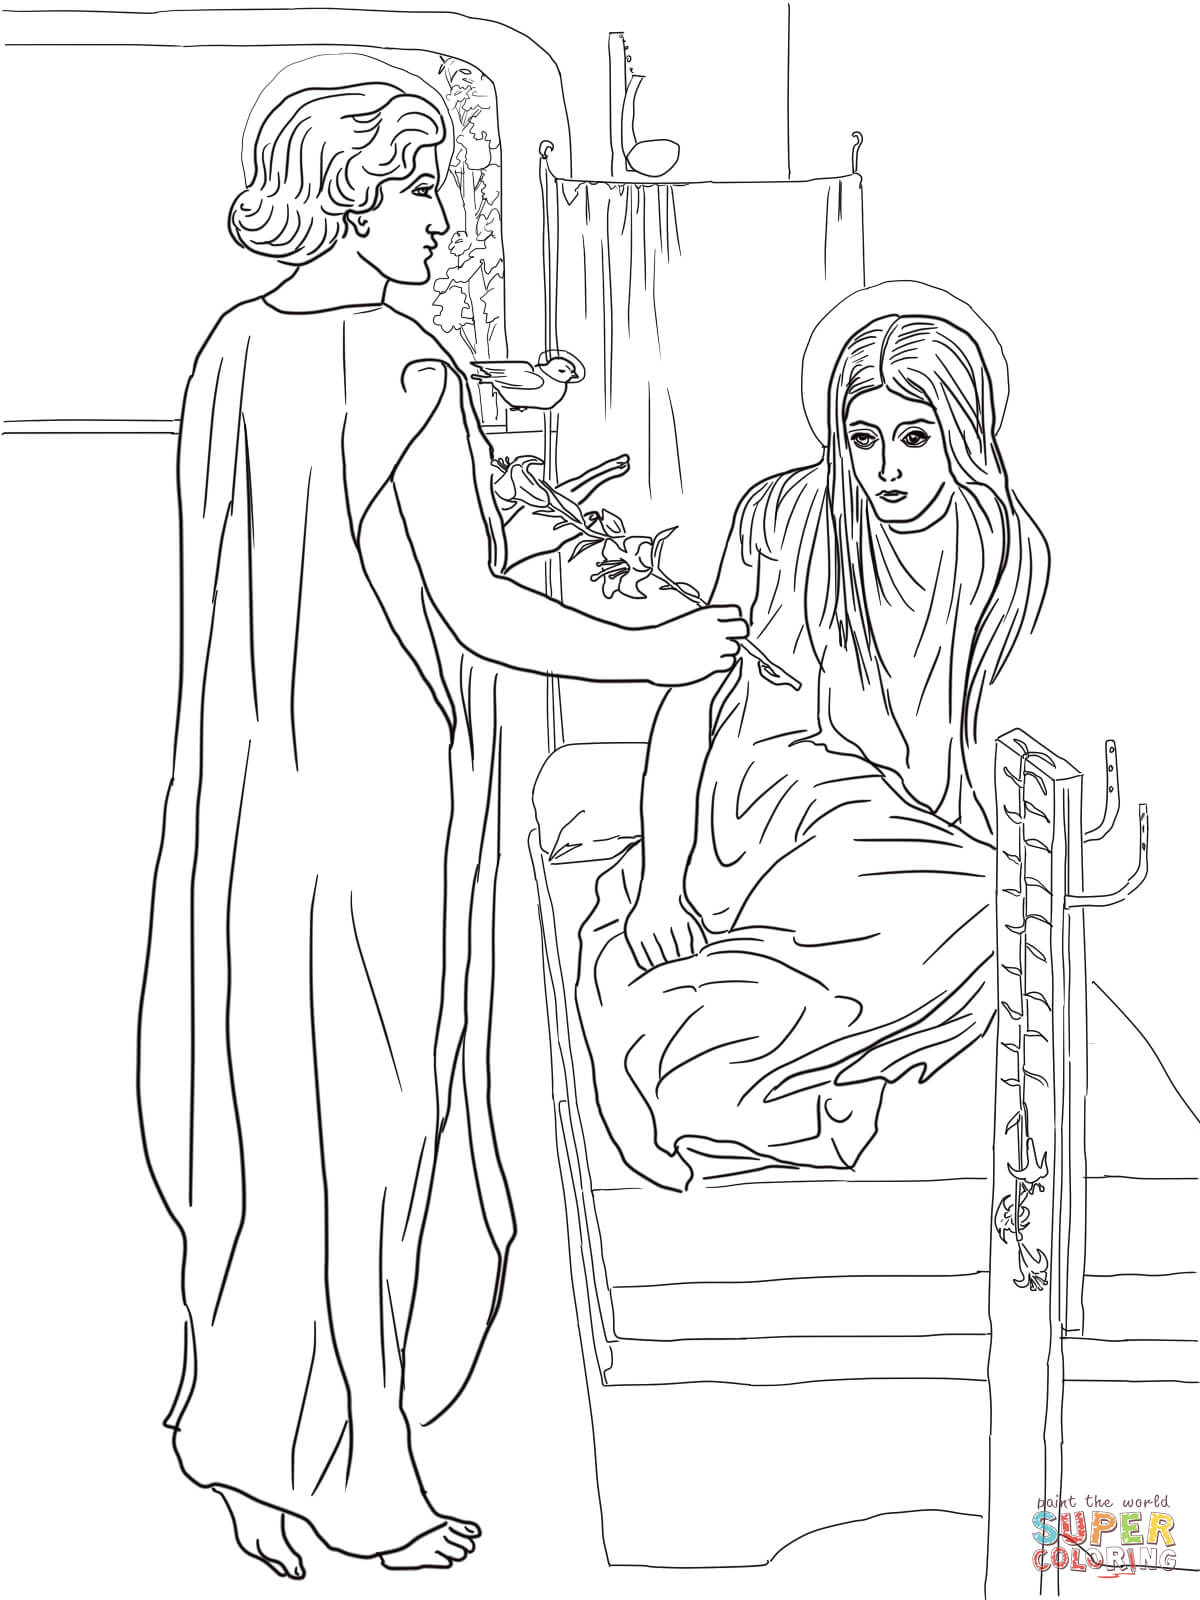 Saint Joseph with the Infant Jesus coloring page | Free Printable ...